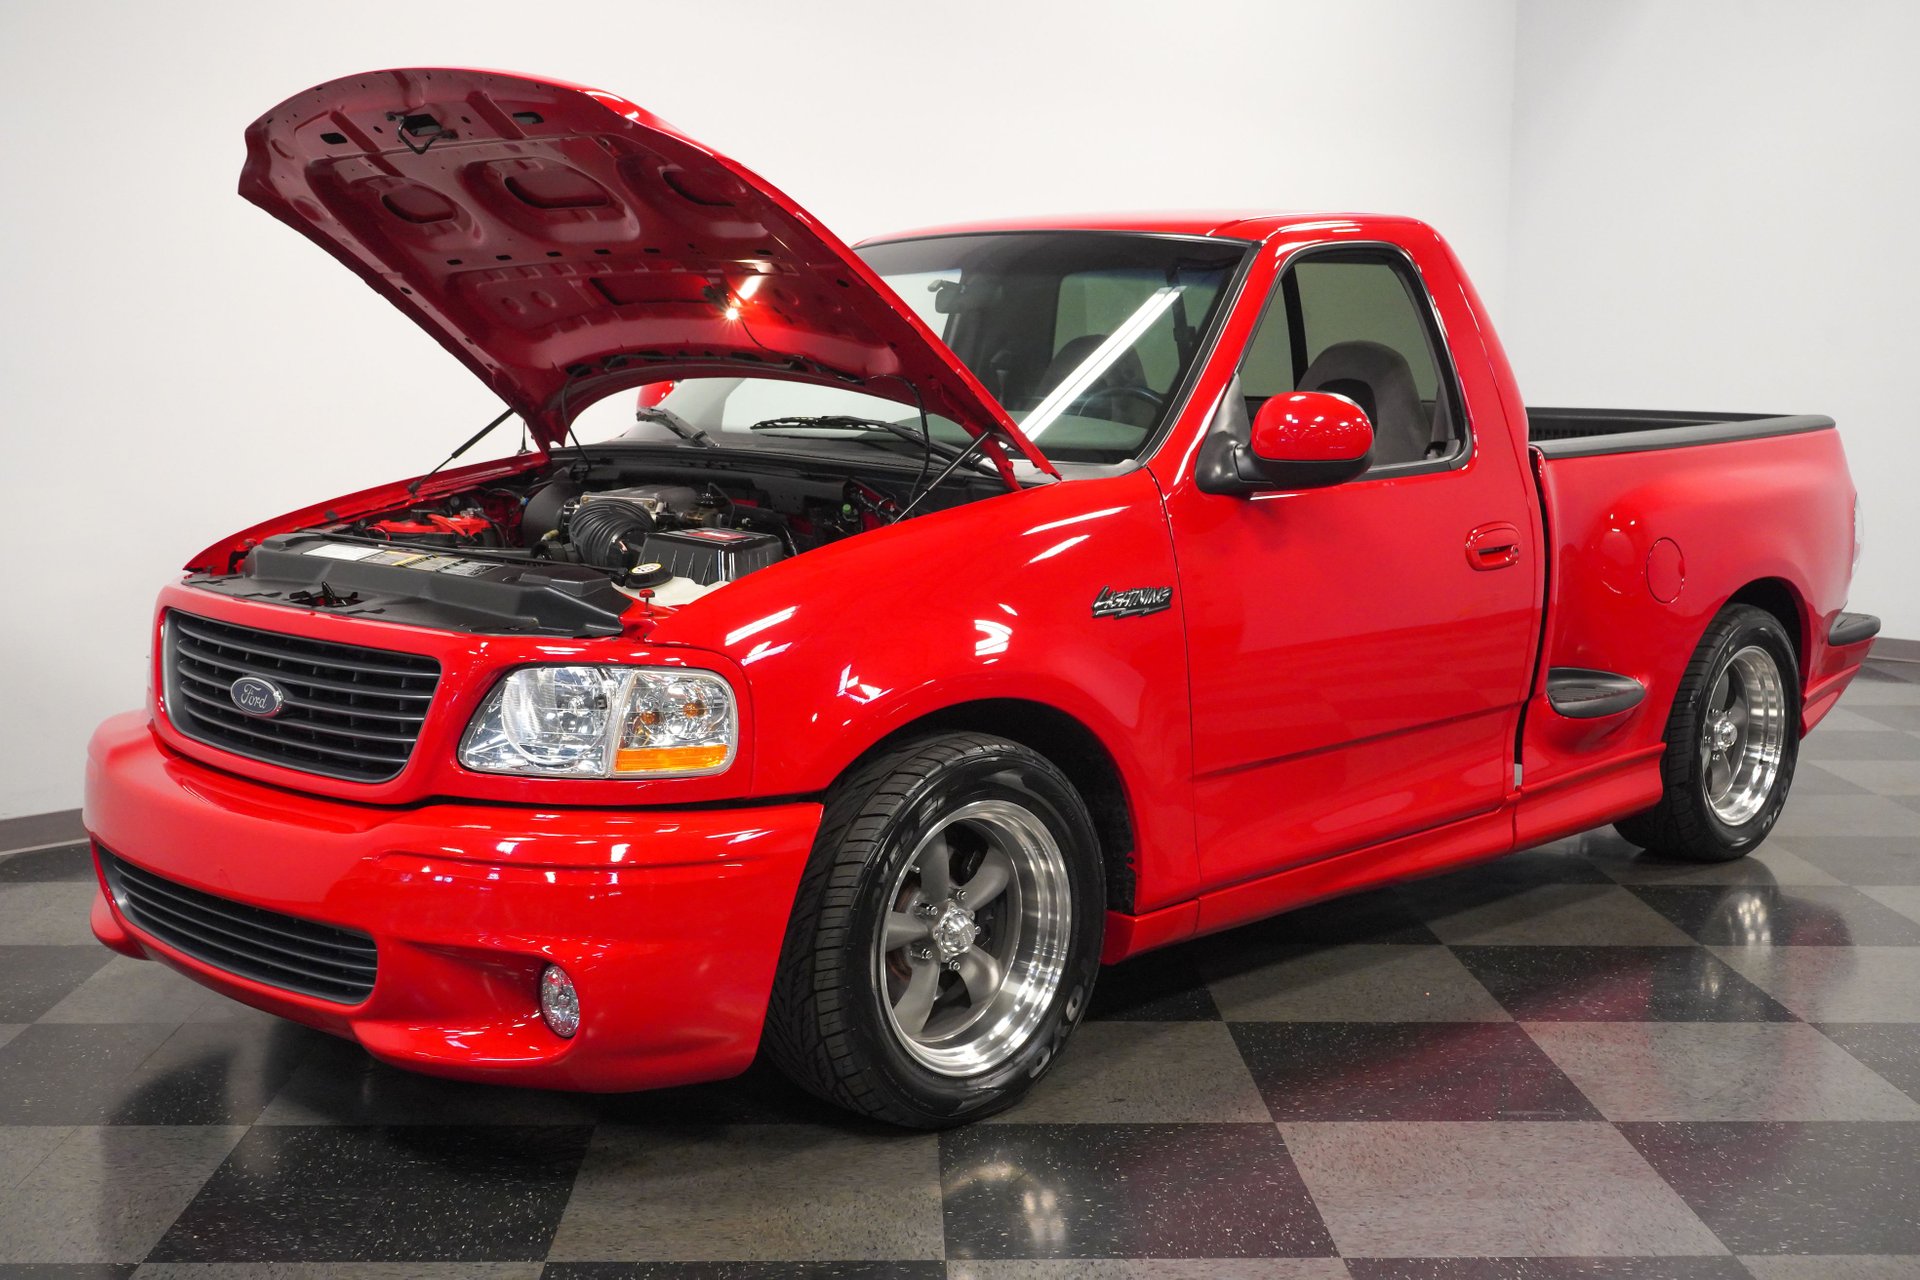 2001ford-f-150-svt-lightning-like-in-the-fast-and-the-furious-is-up-for-grabs-155400_1.jpeg